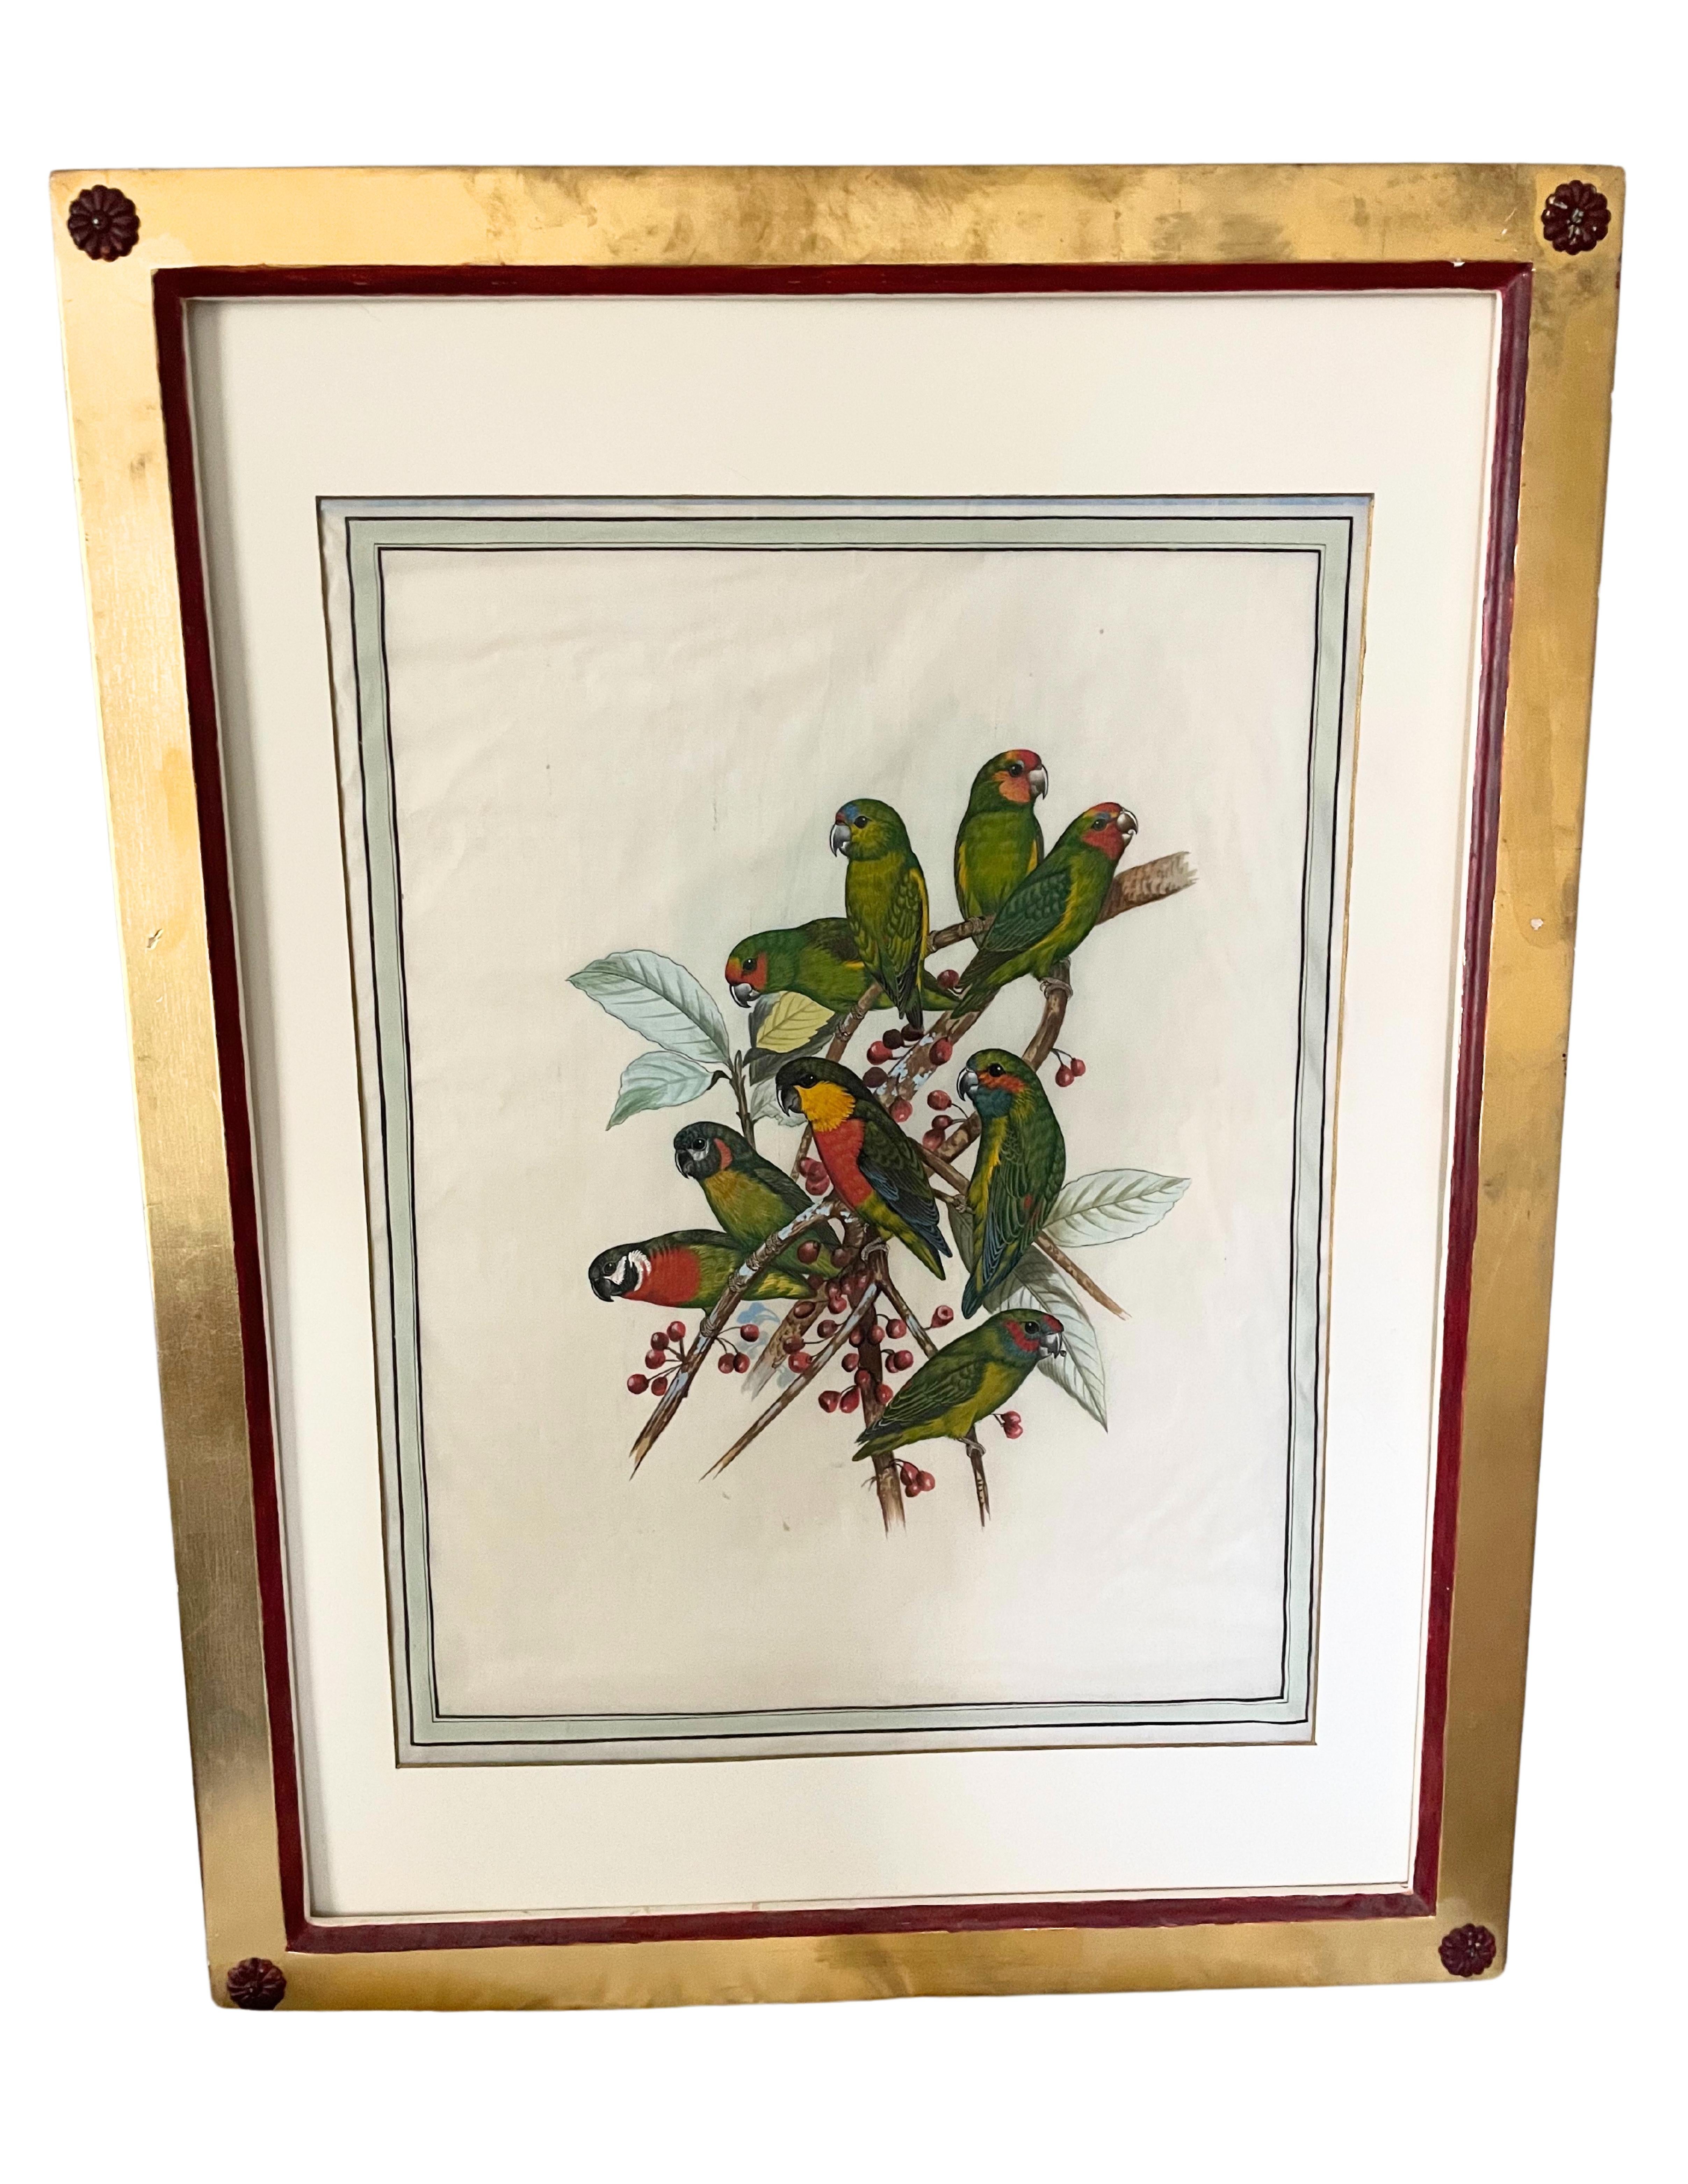 Antique Bird Prints
Natural History Studies of Parrots and Tropical Birds
Hand-colored engravings
23.5 x 30.5  inches each including frame

Imagine all 18 on one wall in your study. 
